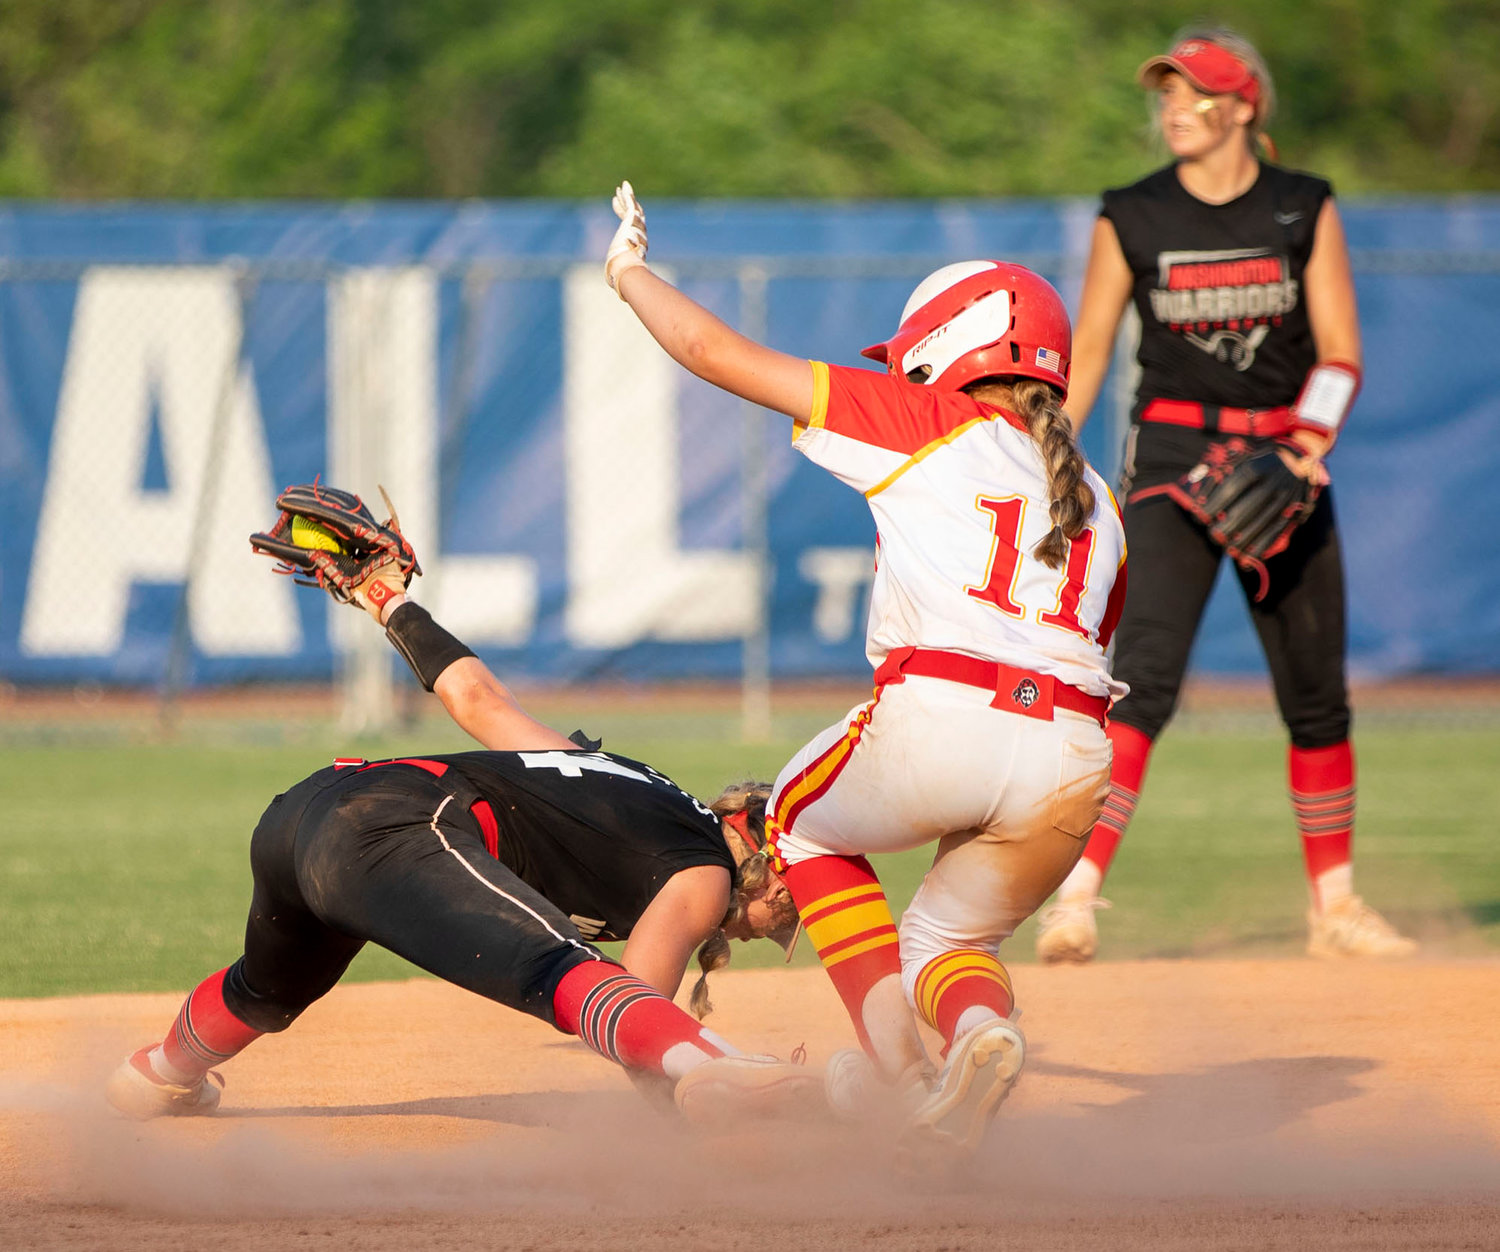 Washington junior Ellie Loveless stretches for every inch as she catches a ball at second base against Dale in the finals of the State tournament. Washington won 17-7.